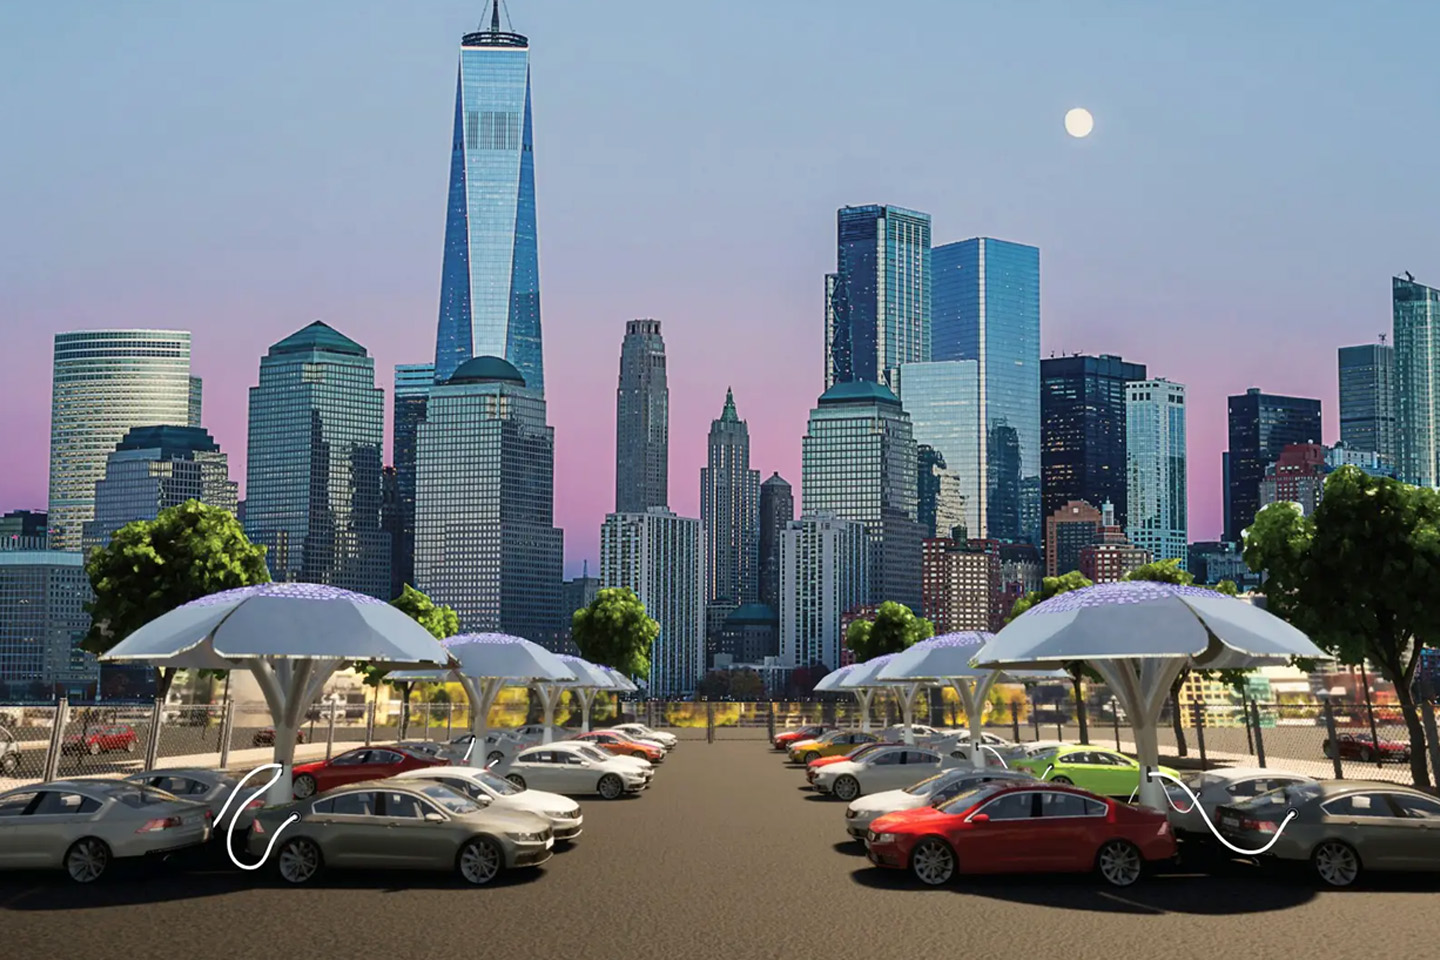 #These dome-shaped solar trees use AI to charge electric vehicles and combat the issue of EV charging